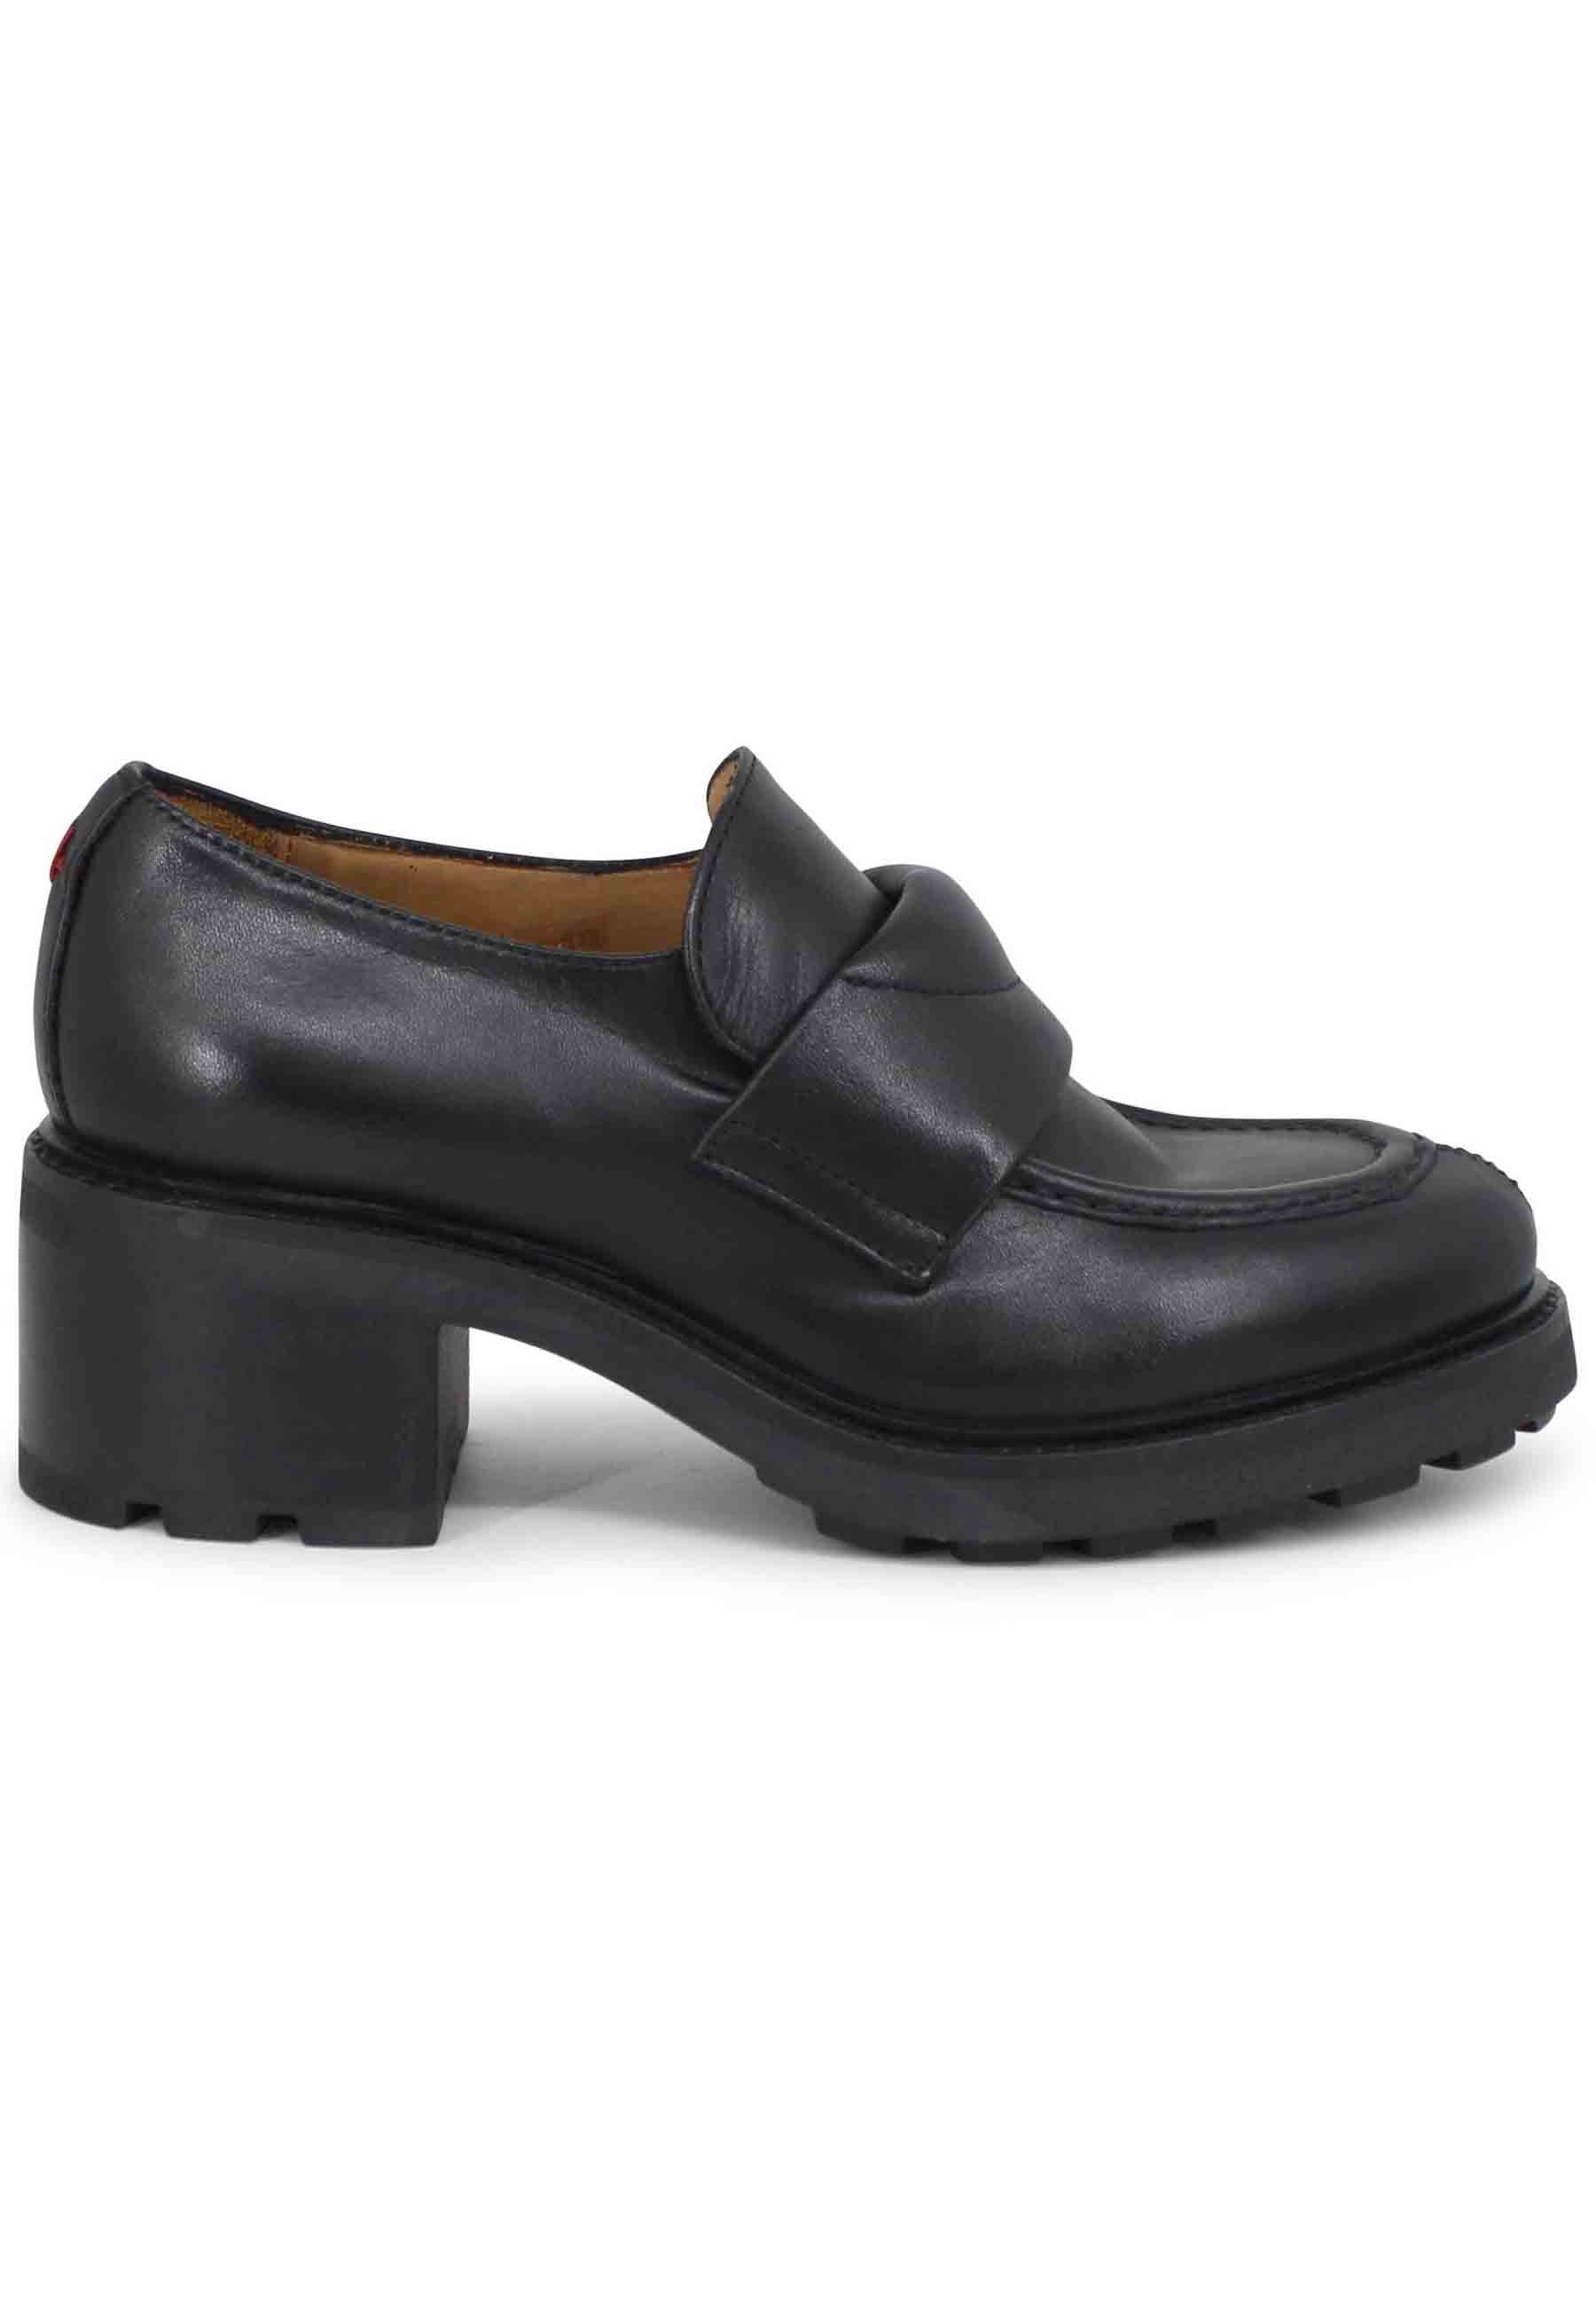 Women's black leather loafers with lug sole